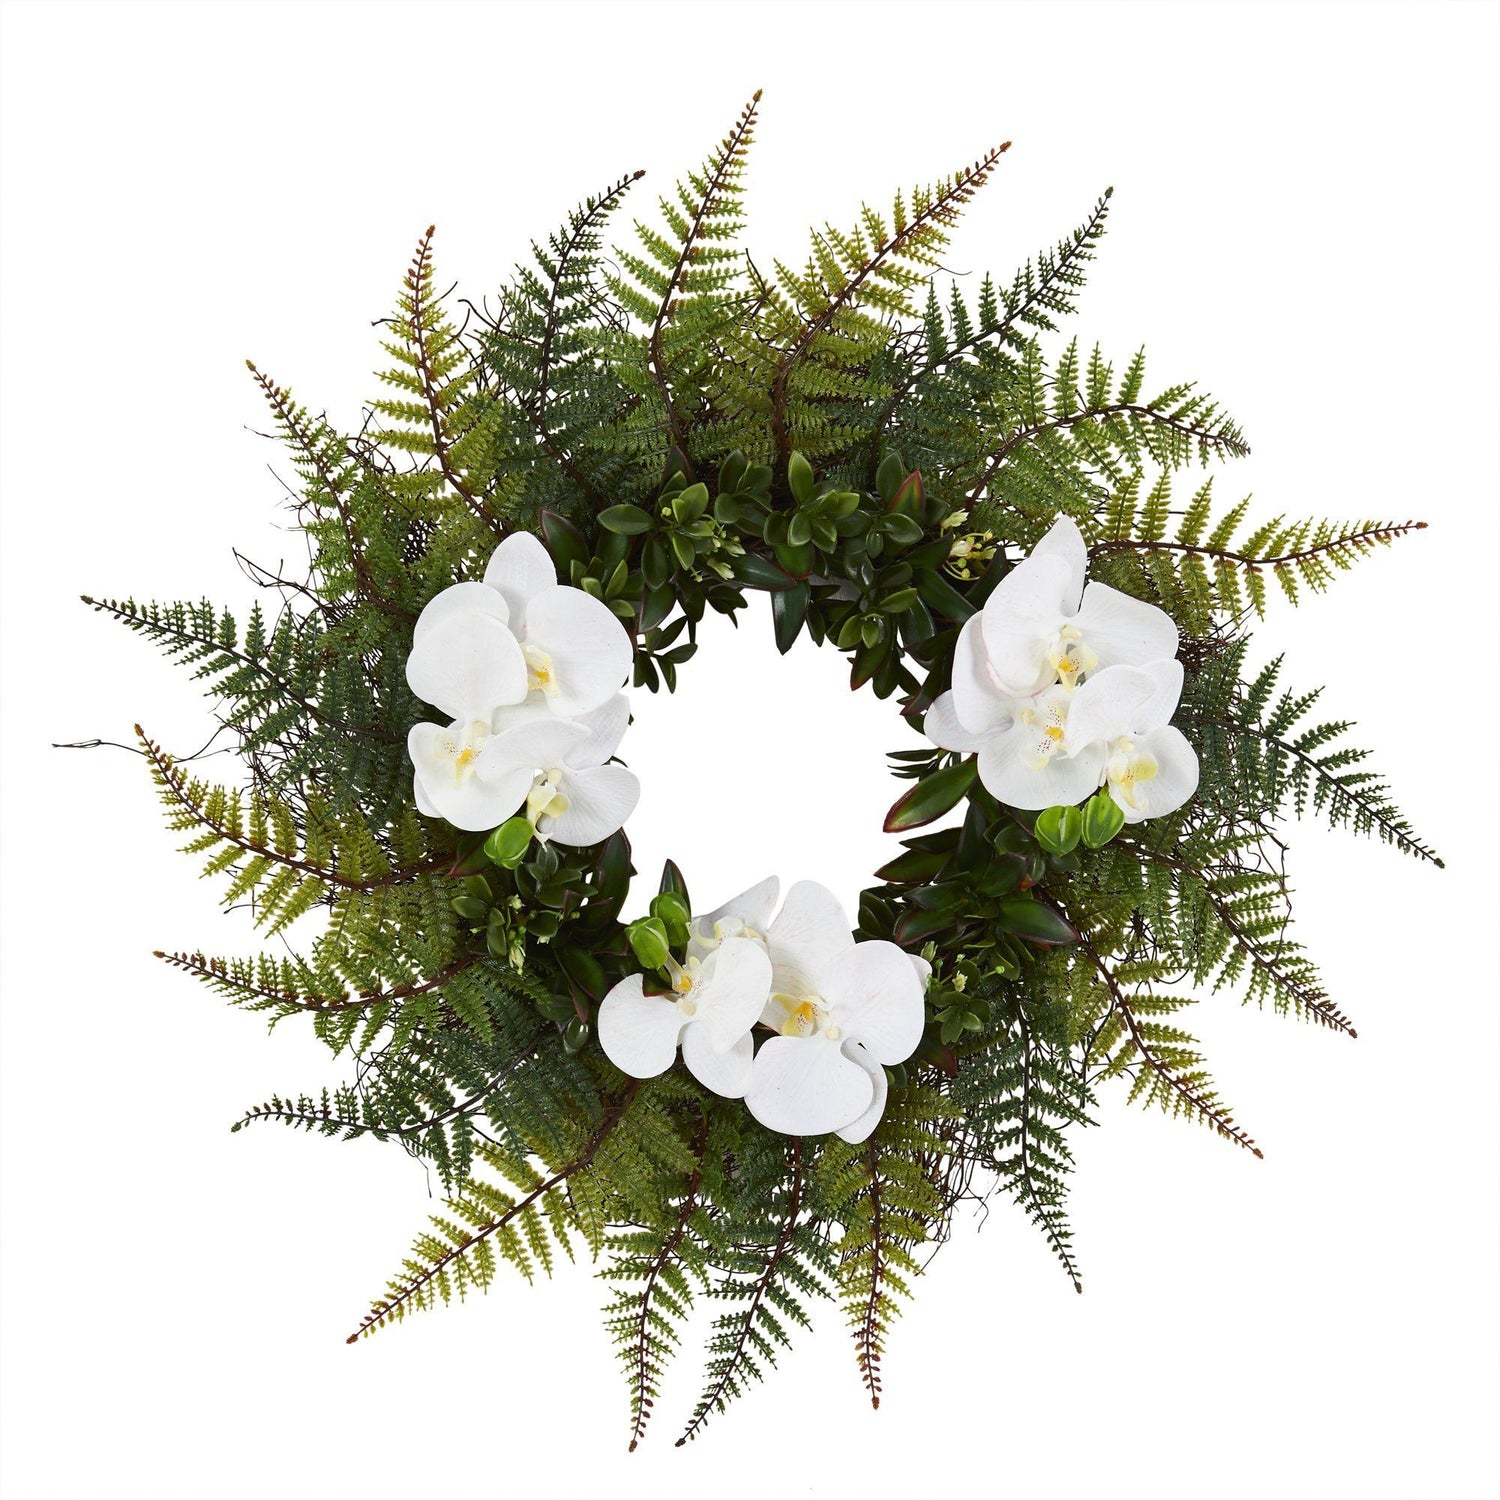 23” Assorted Fern and Phalaenopsis Orchid Artificial Wreath